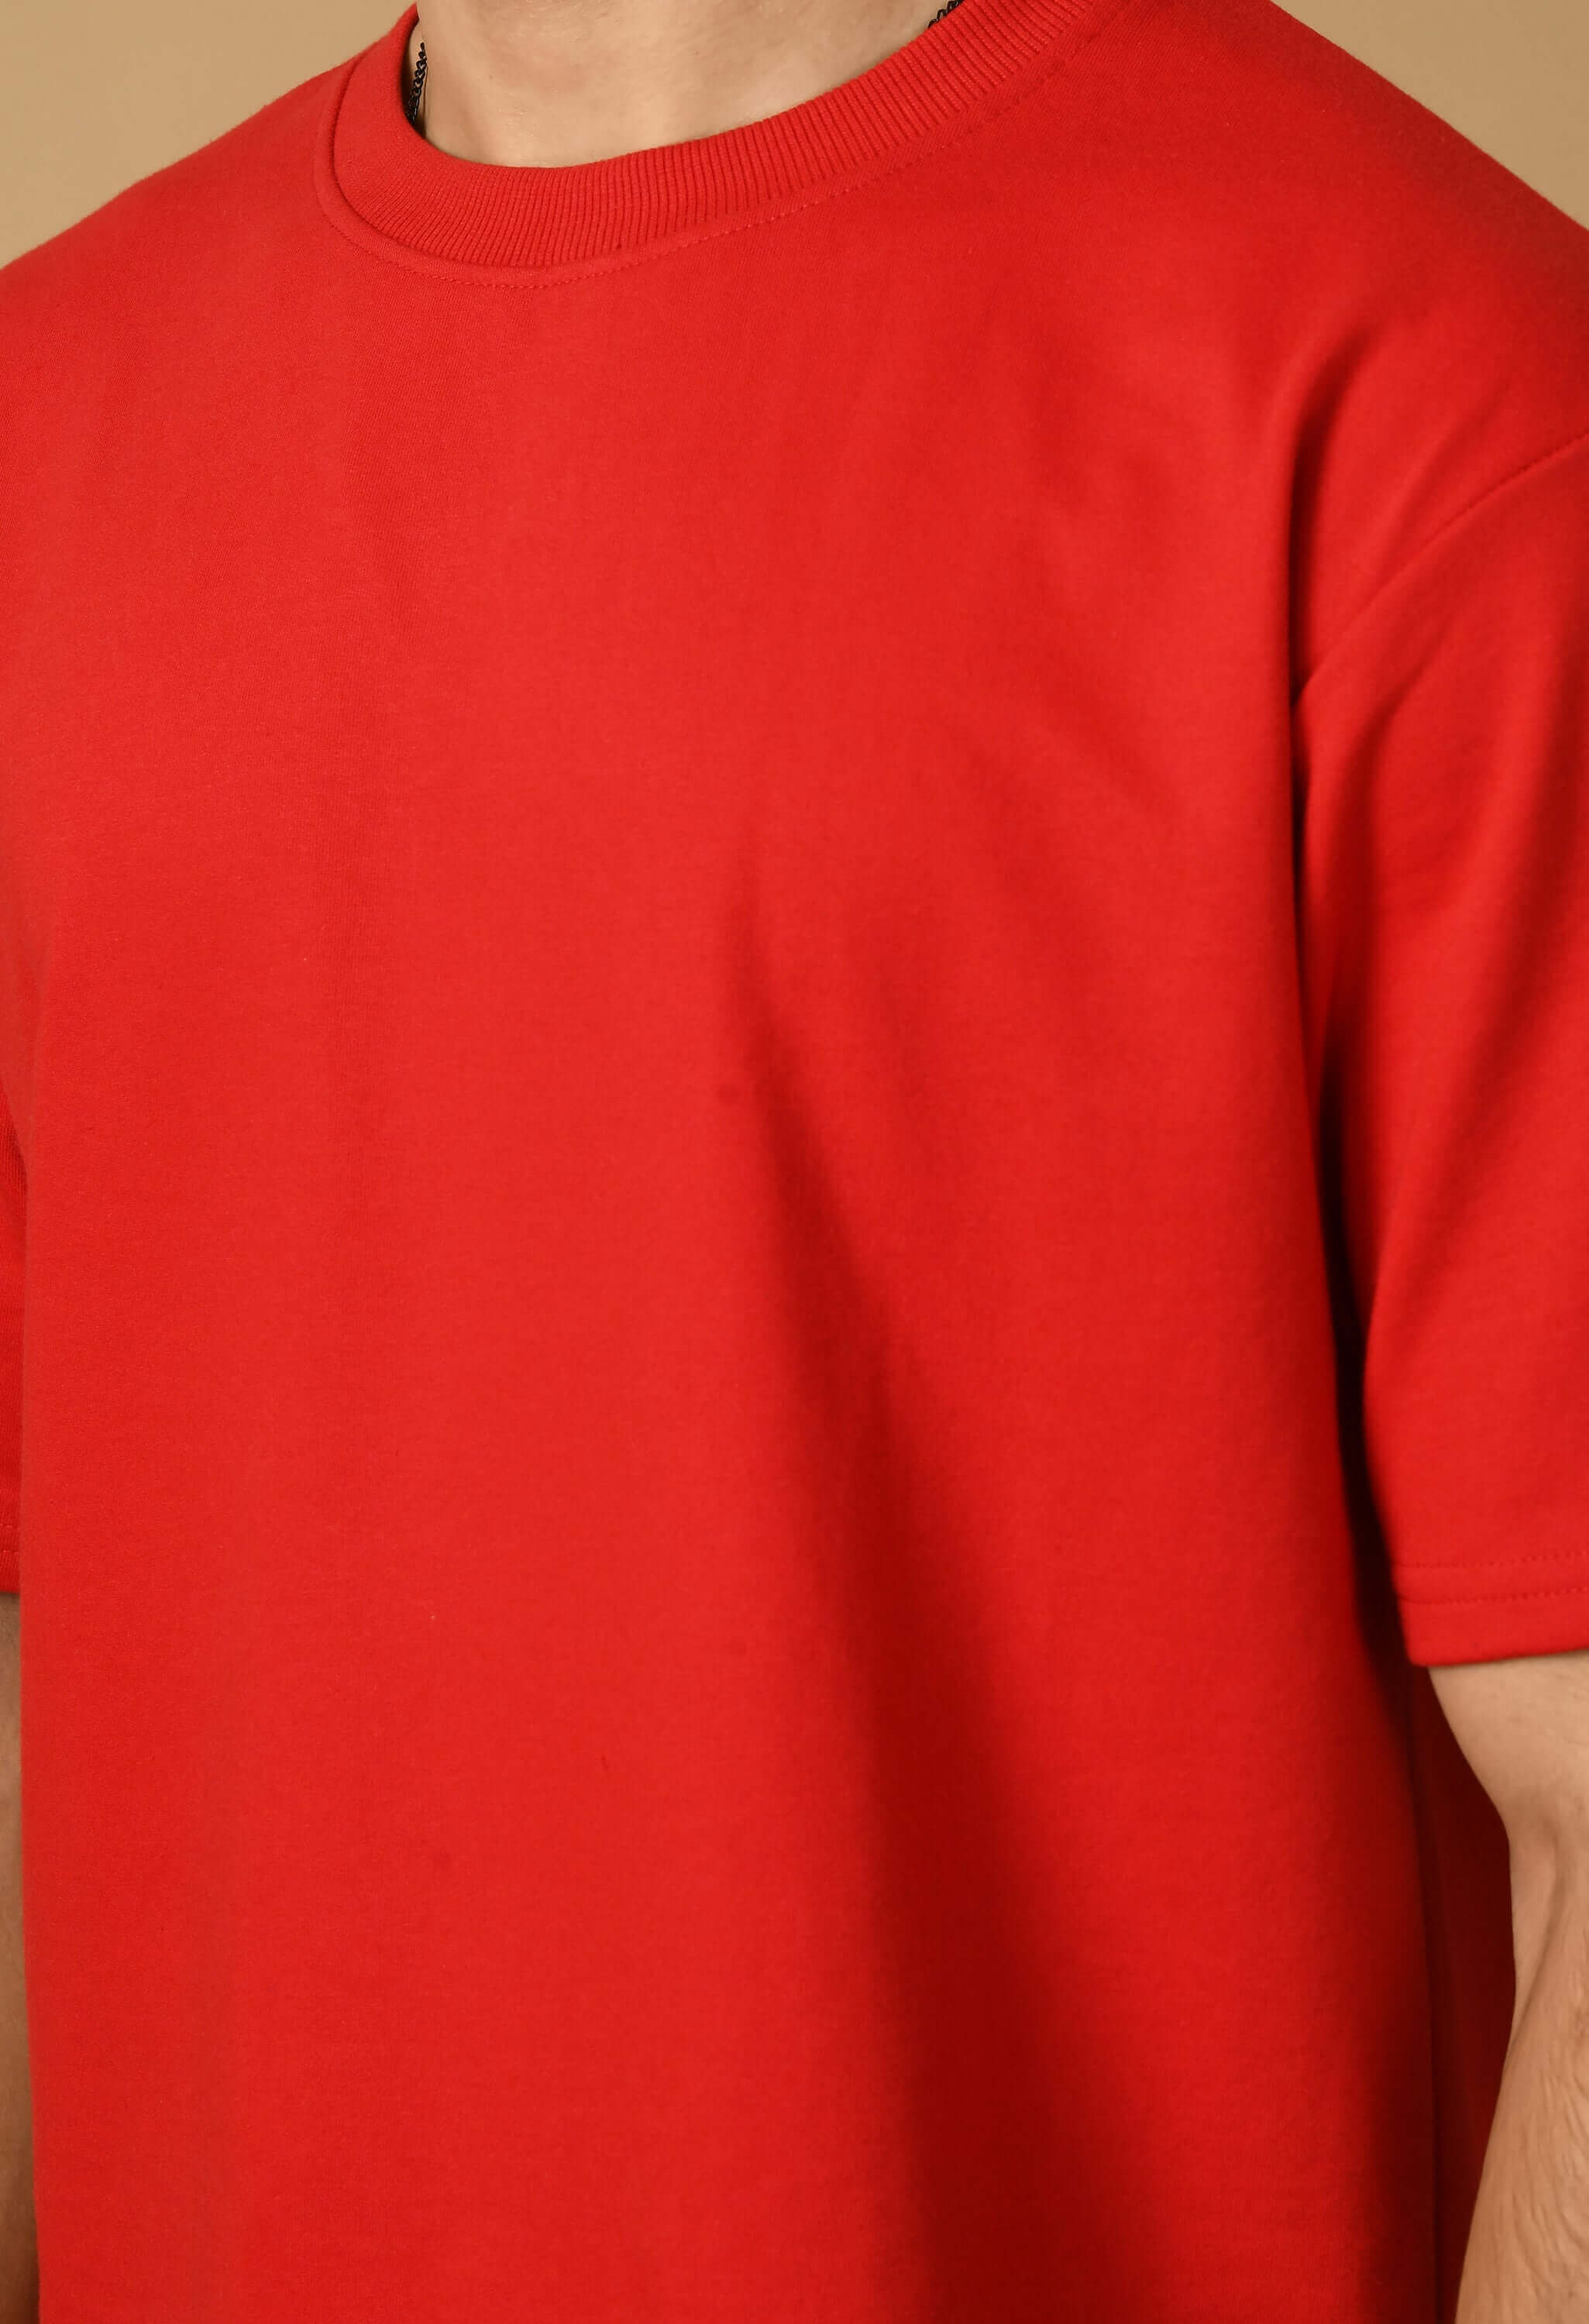 men's oversized red t-shirt by offmint